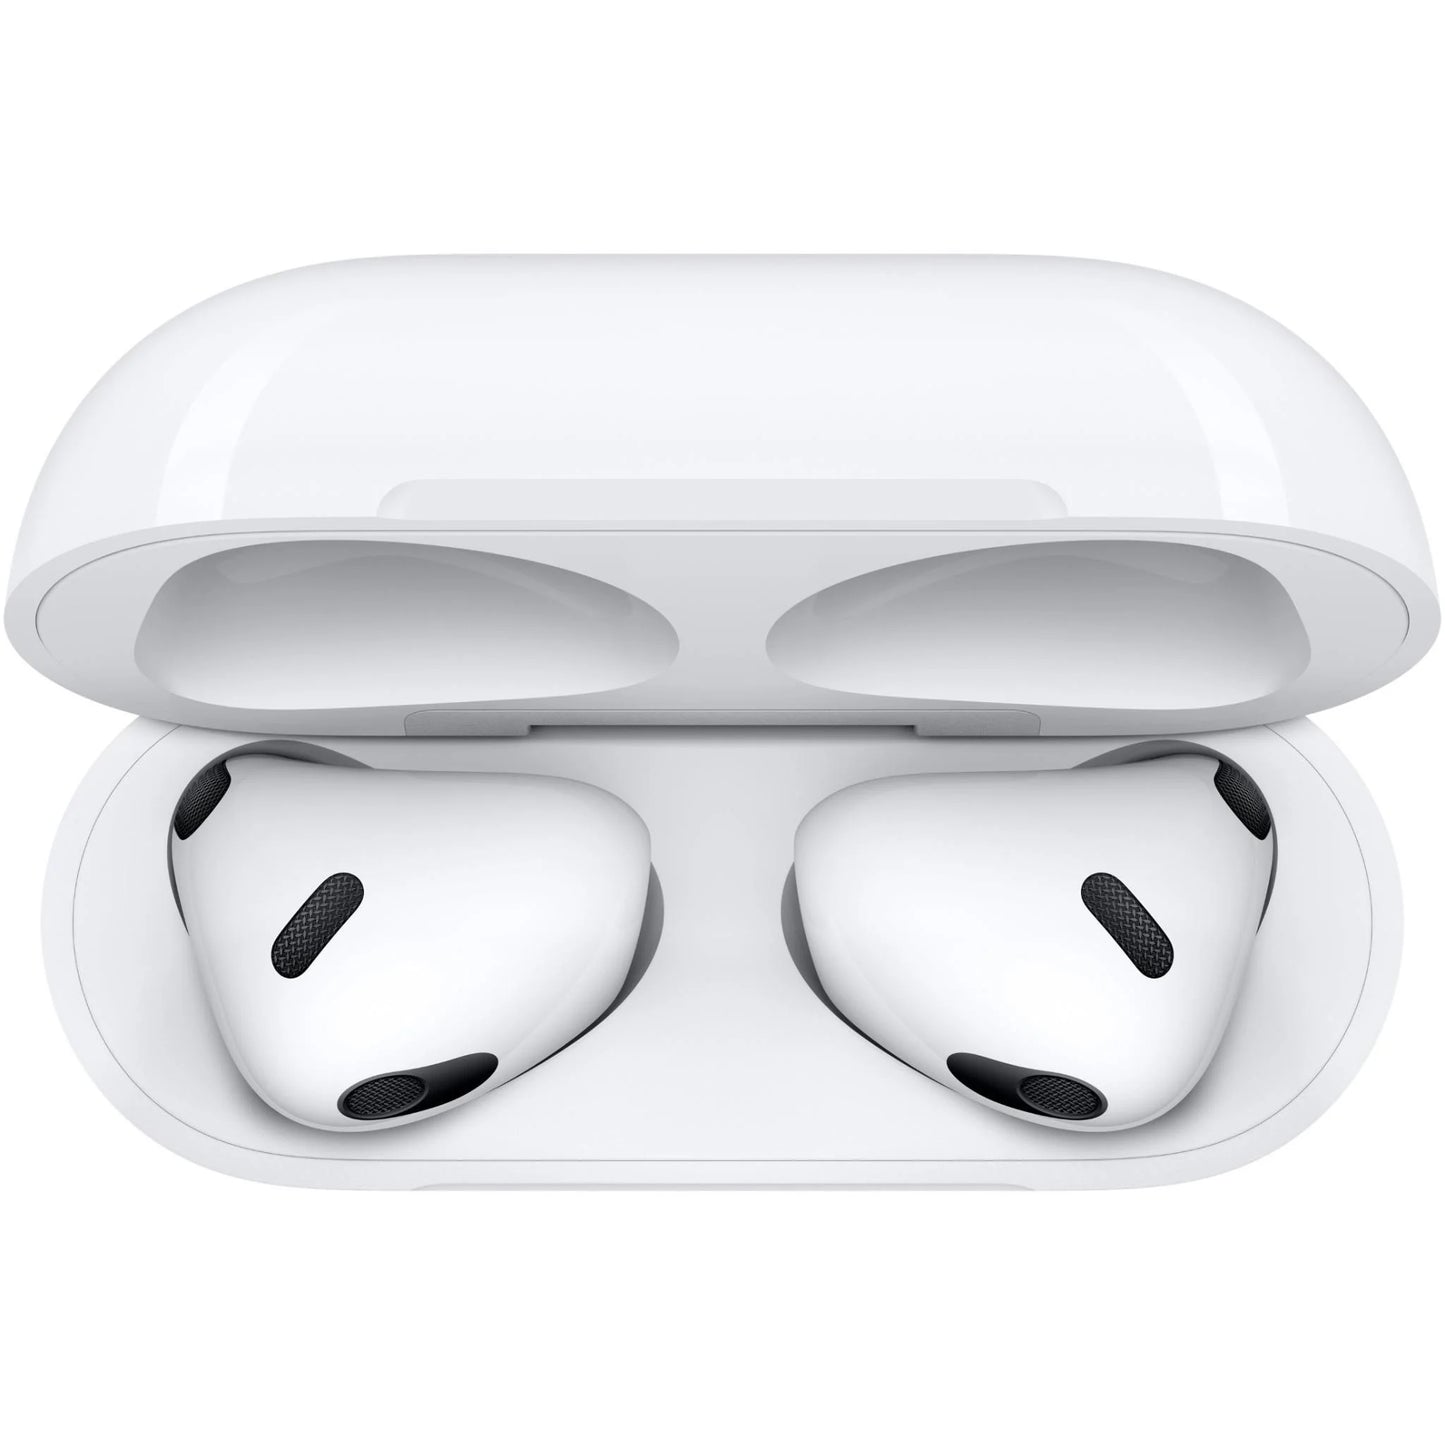 Apple AirPods [3rd Generation]